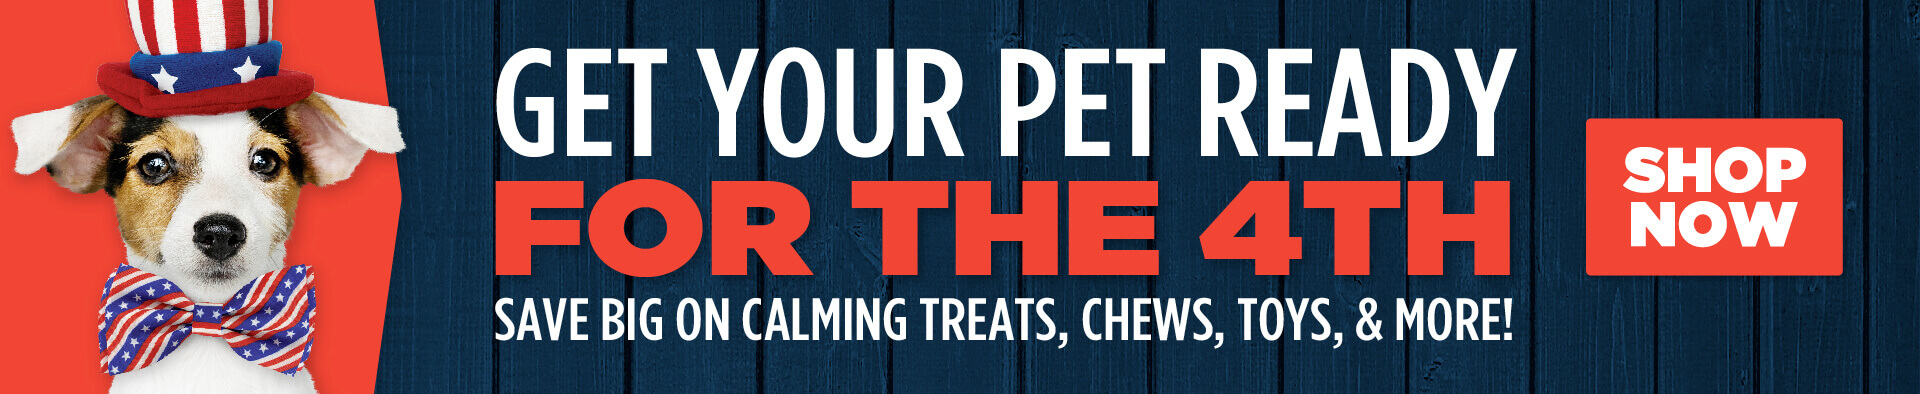 Get Your Pet Ready for the 4th. Save on Calming treats, chews, and more - shop now